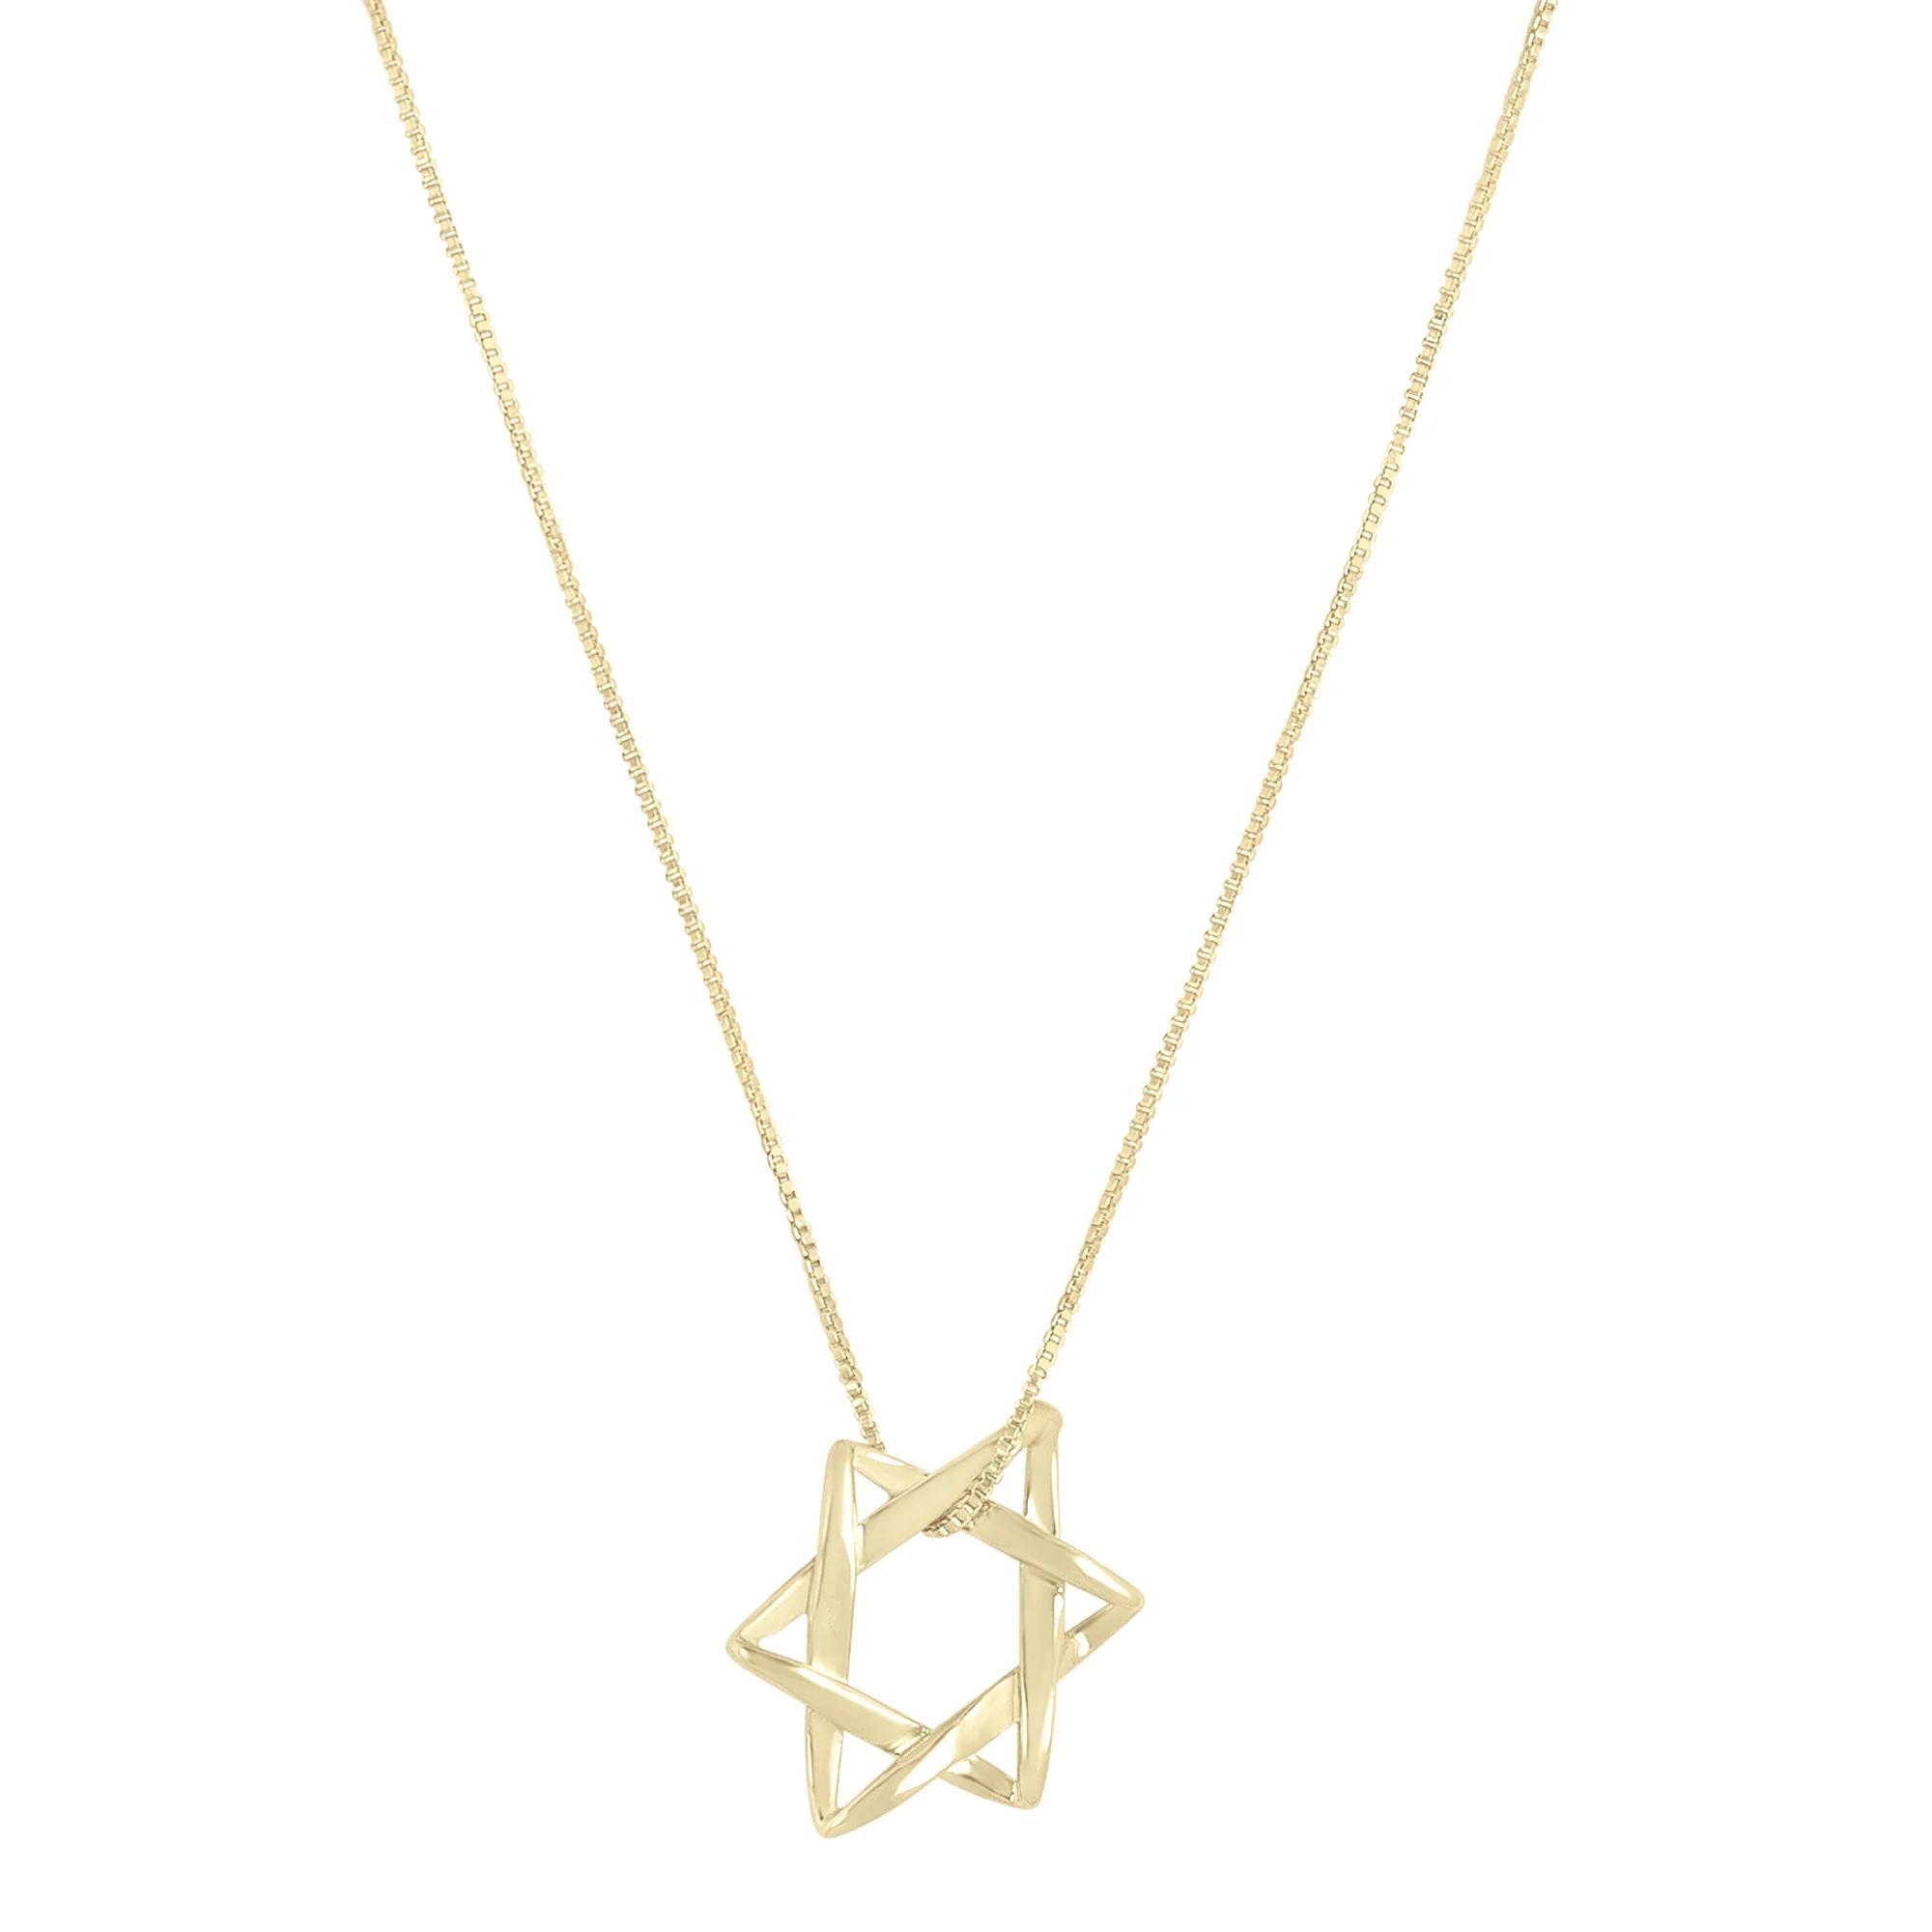 Shining Star Necklace | Electric Picks Jewelry